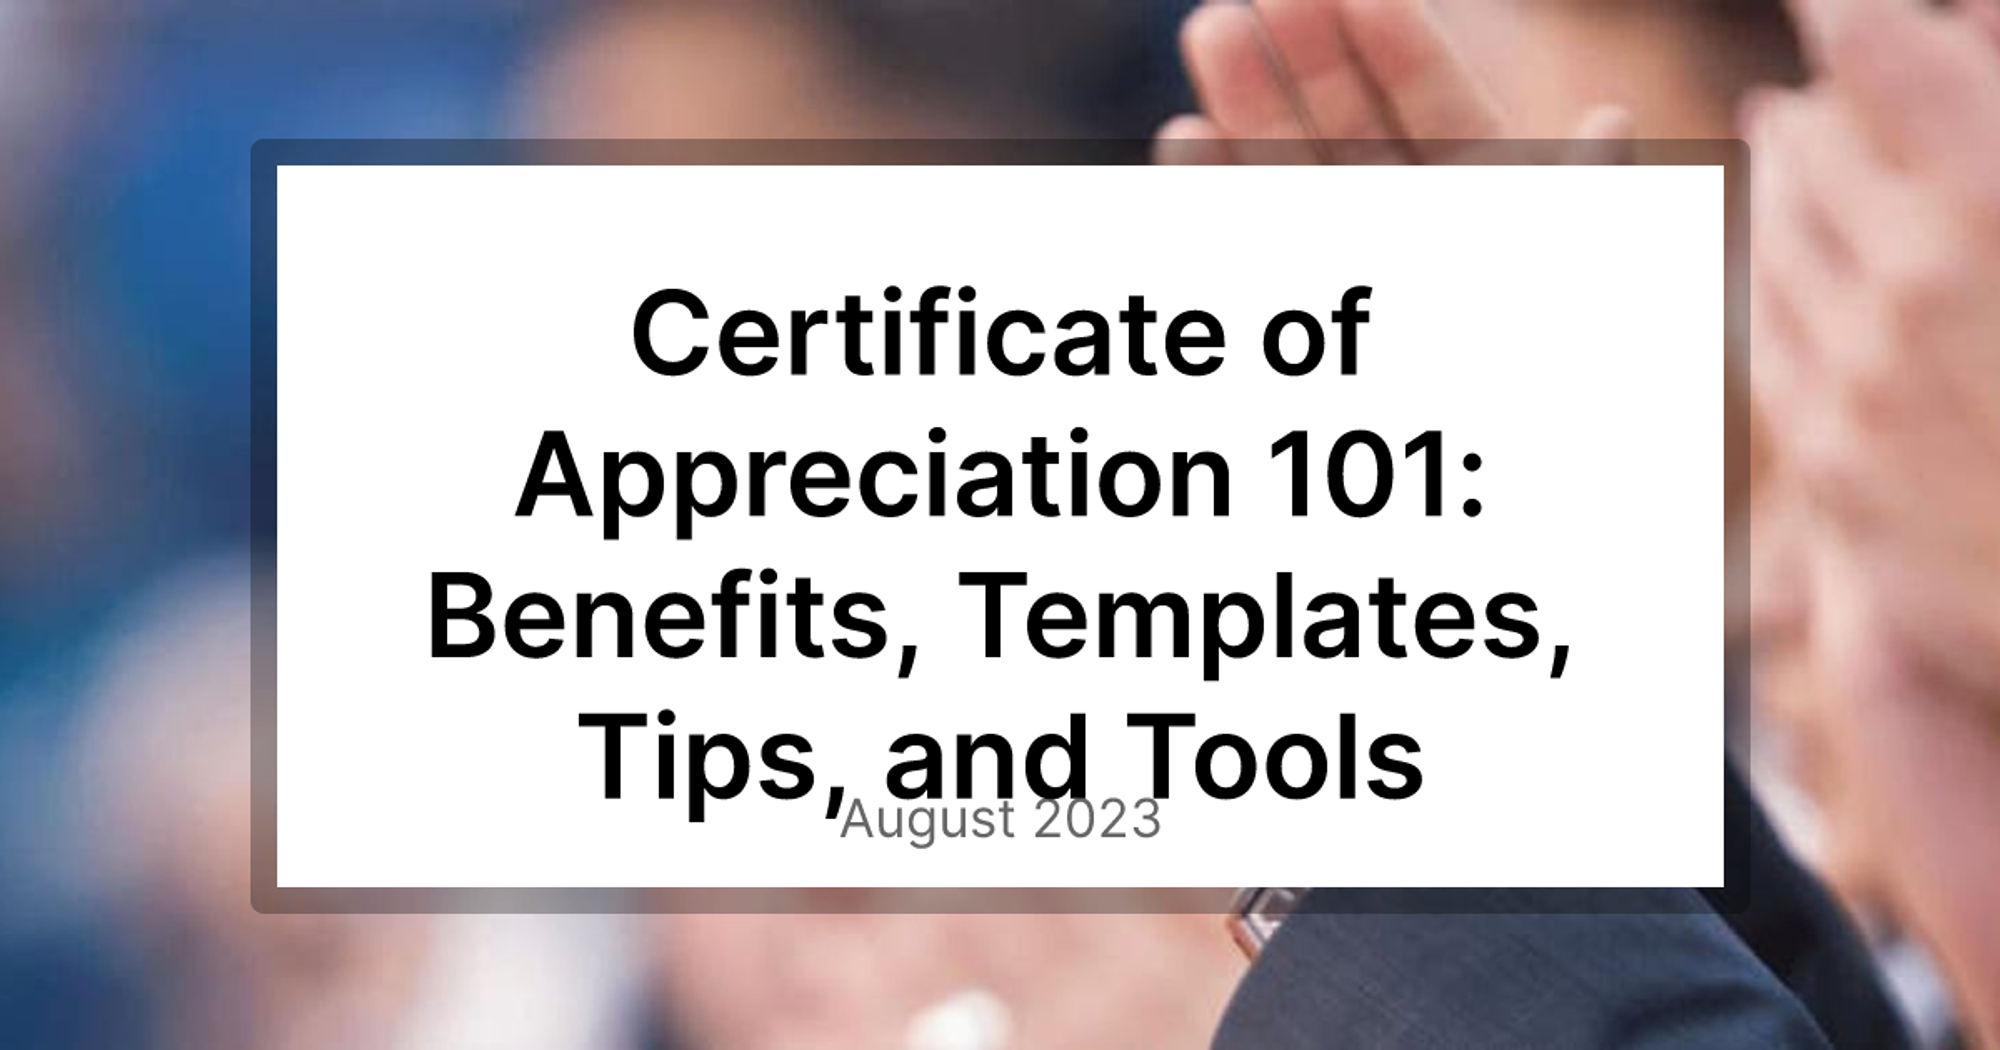 Certificate of Appreciation 101: Benefits, Templates, Tips, and Tools